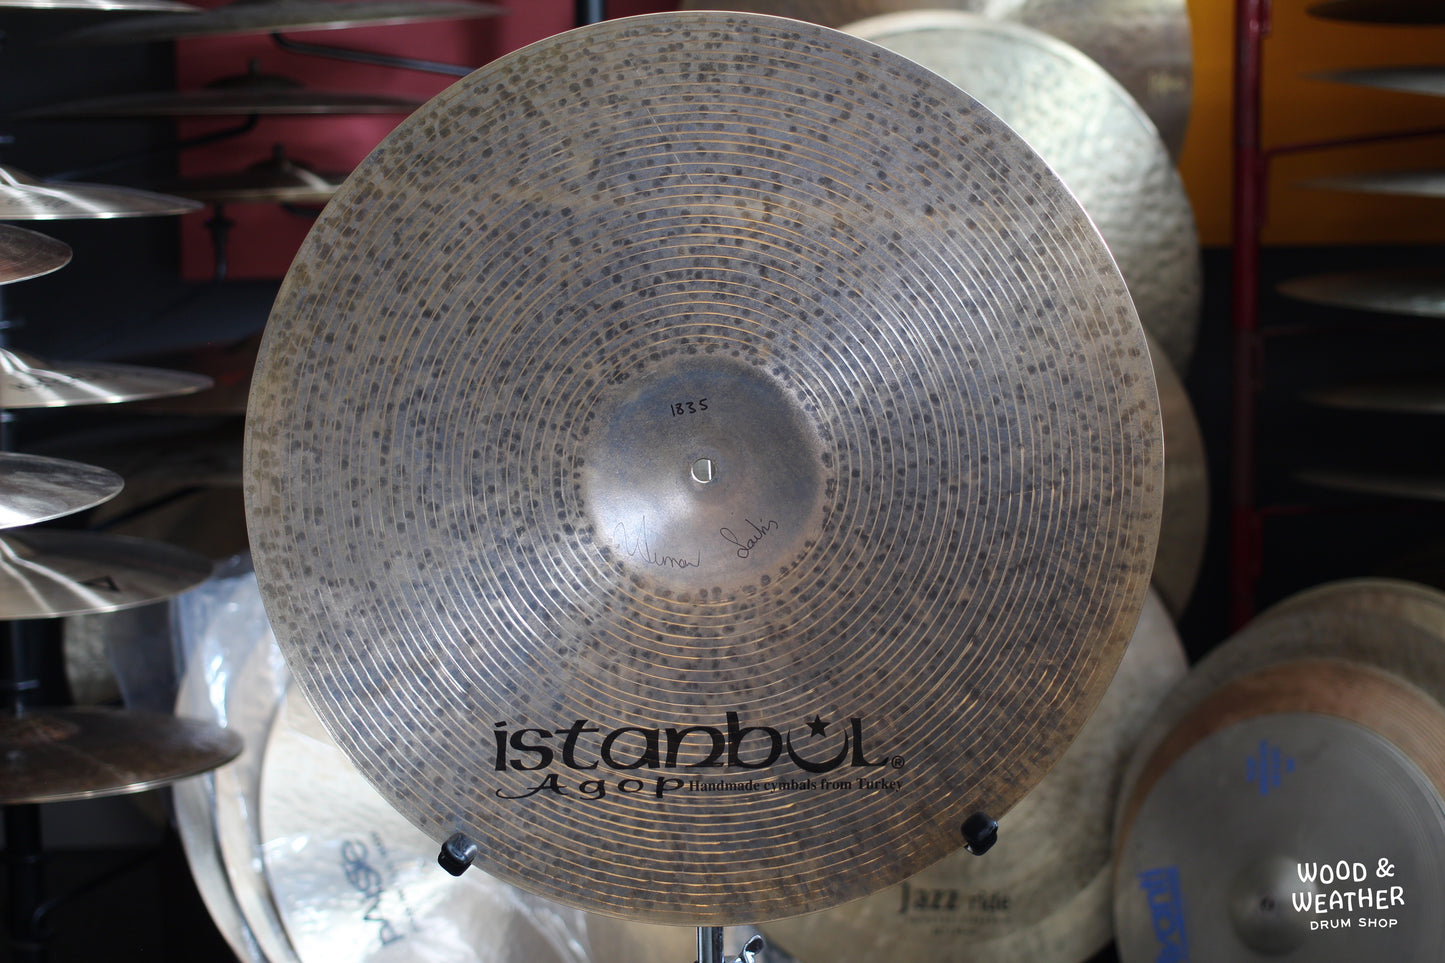 Istanbul Agop 20" Special Edition Jazz Ride Cymbal 1835g